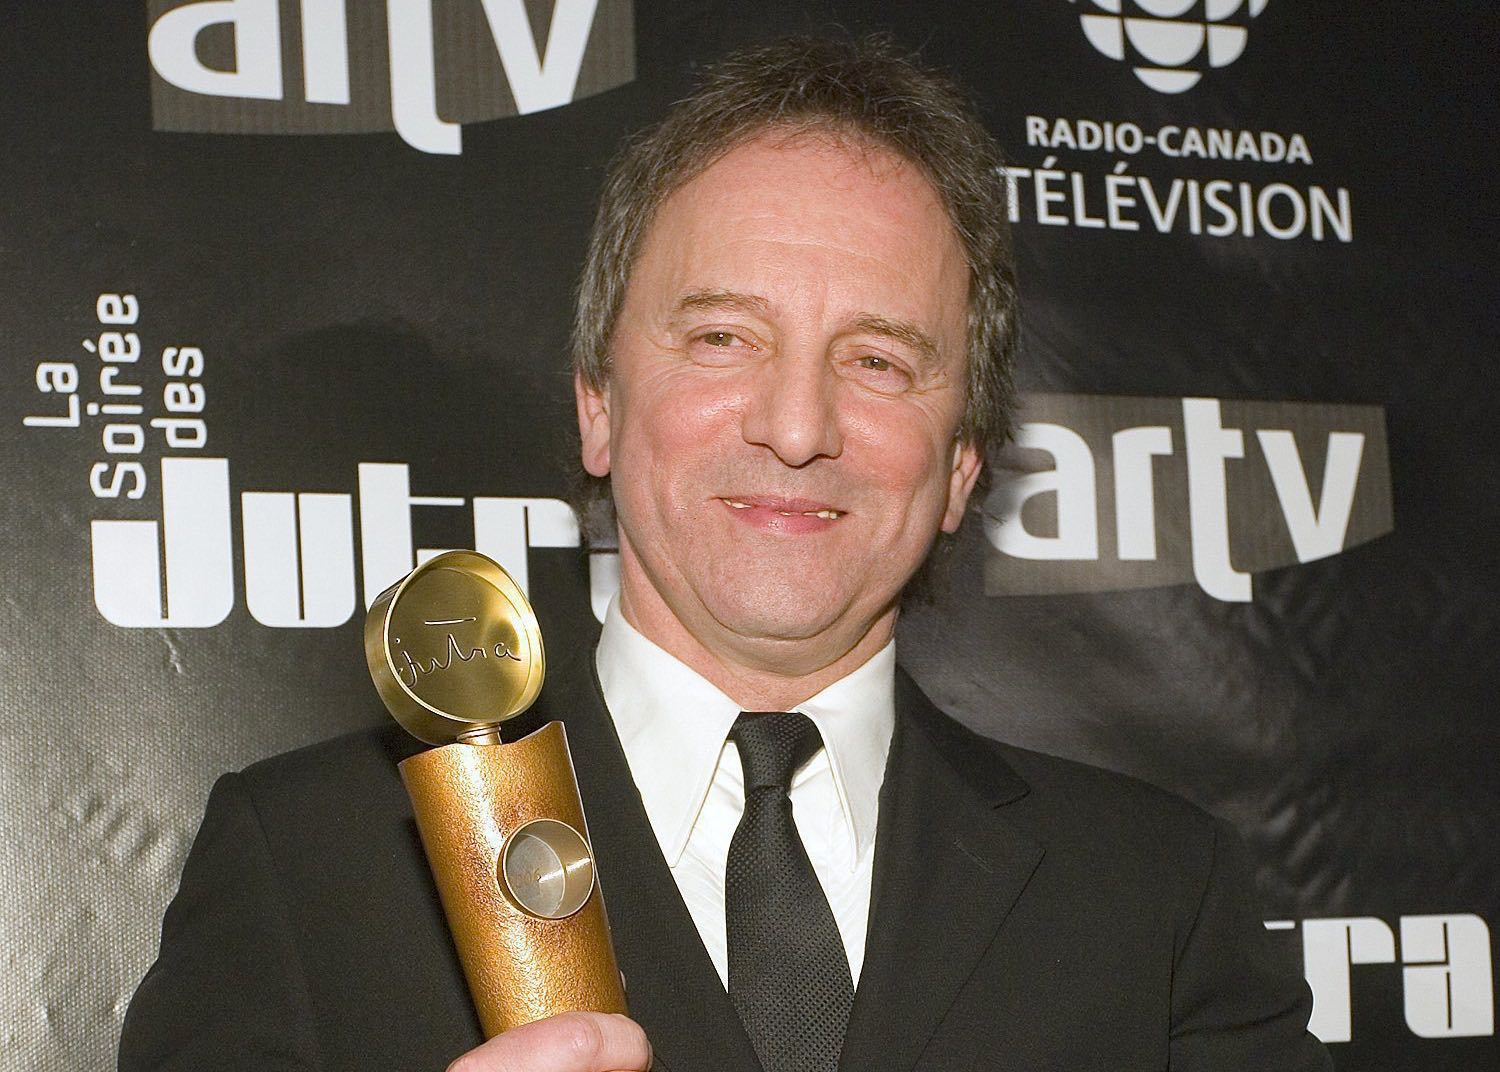 Michel Cote poses backstage after winning Best supporting actor in a male role in "C.R.A.Z.Y." at the 2006 Jutras Awards. Sunday March 19, 2006 in Montreal. (CP PHOTO/David Boily)